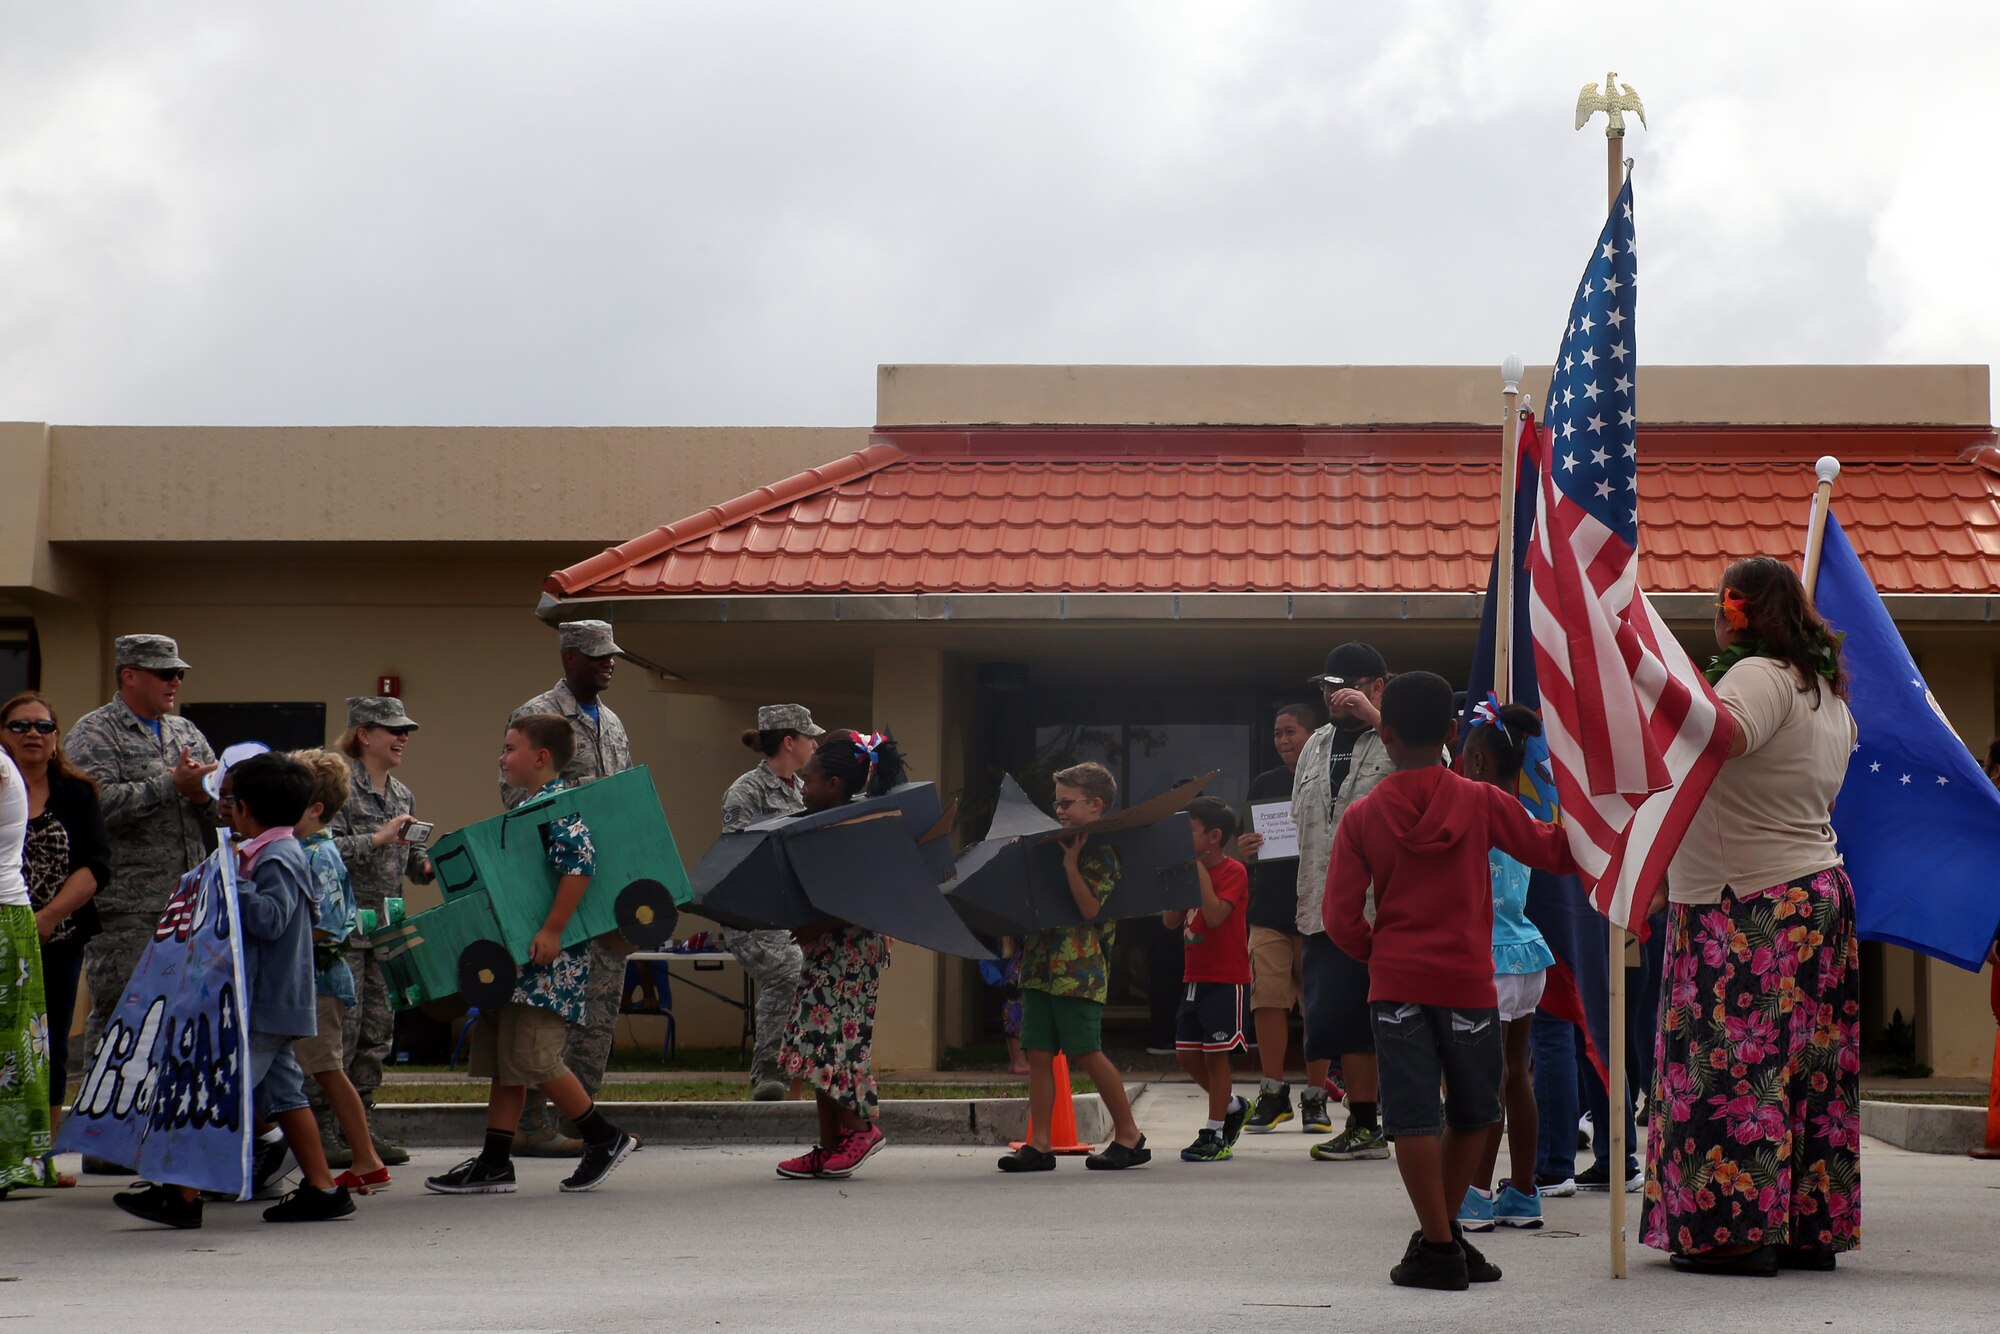 Andersen Child Development Center children participate in a parade April 10, 2015, at Andersen Air Force Base, Guam, to celebrate the Month of the Military Child. April was designated as the Month of the Military Child in 1986 to recognize sacrifices and contributions of children in the armed forces community. (U.S. Air Force photo by Staff Sgt. Melissa B. White/Released)
